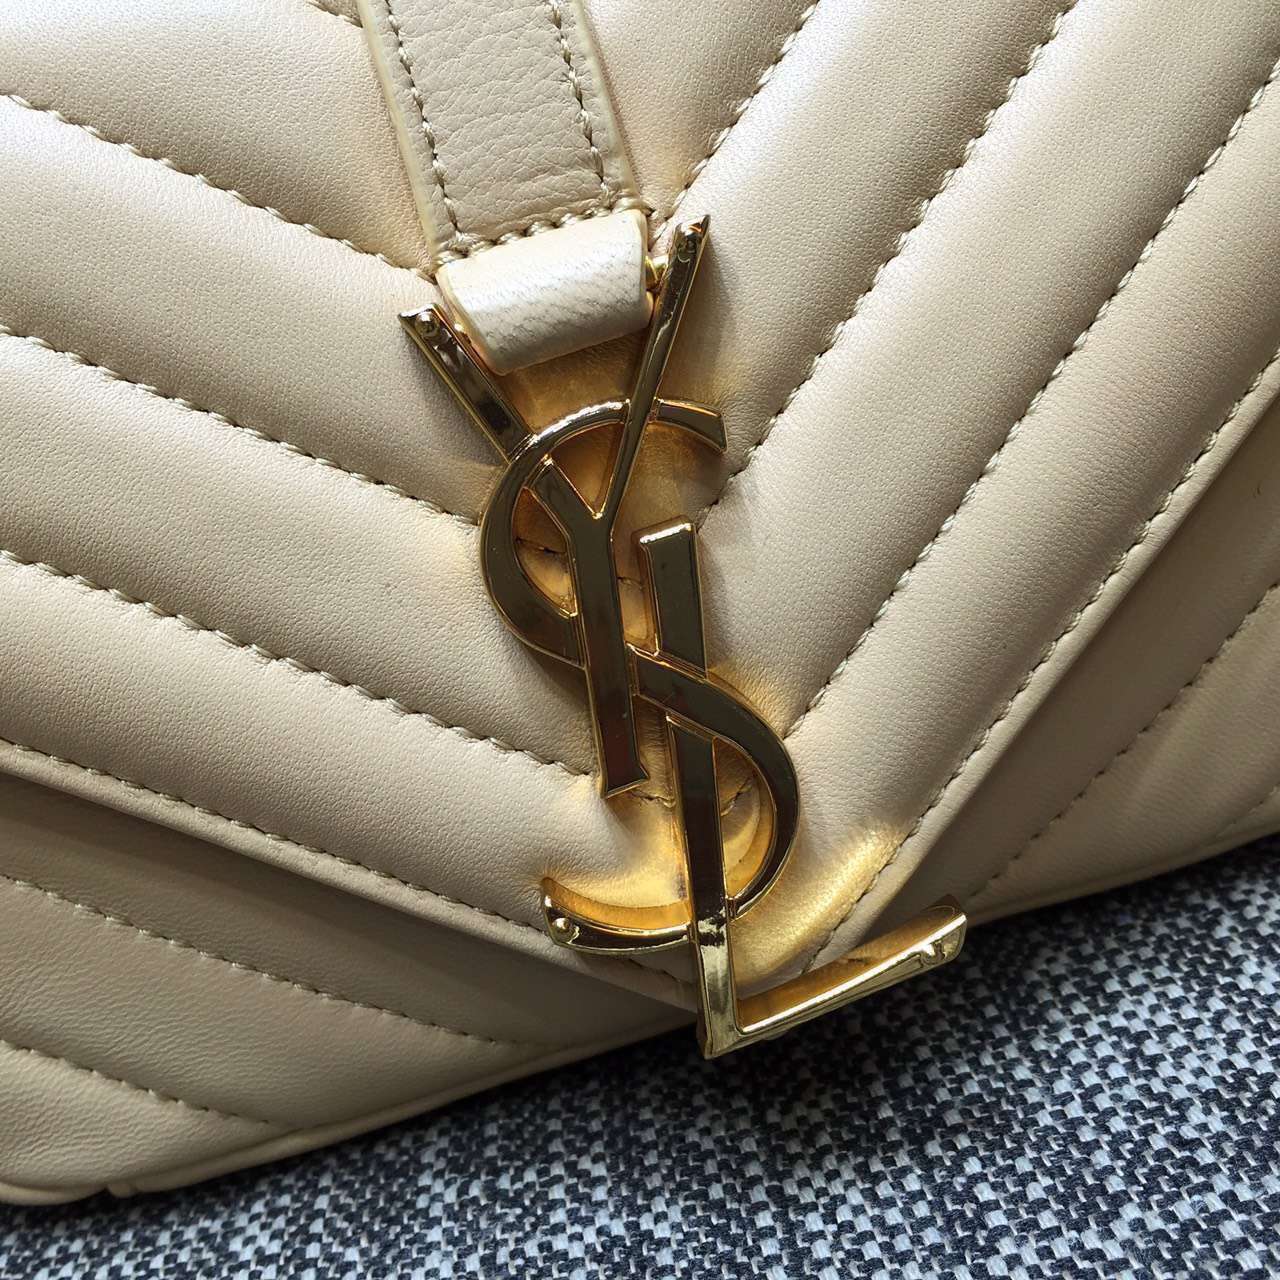 2015 Cheap YSL Out Sale with Free Shipping-Saint Laurent Classic Baby Monogram Satchel in Off-white Matelasse Leather with Gold Hardware - Click Image to Close